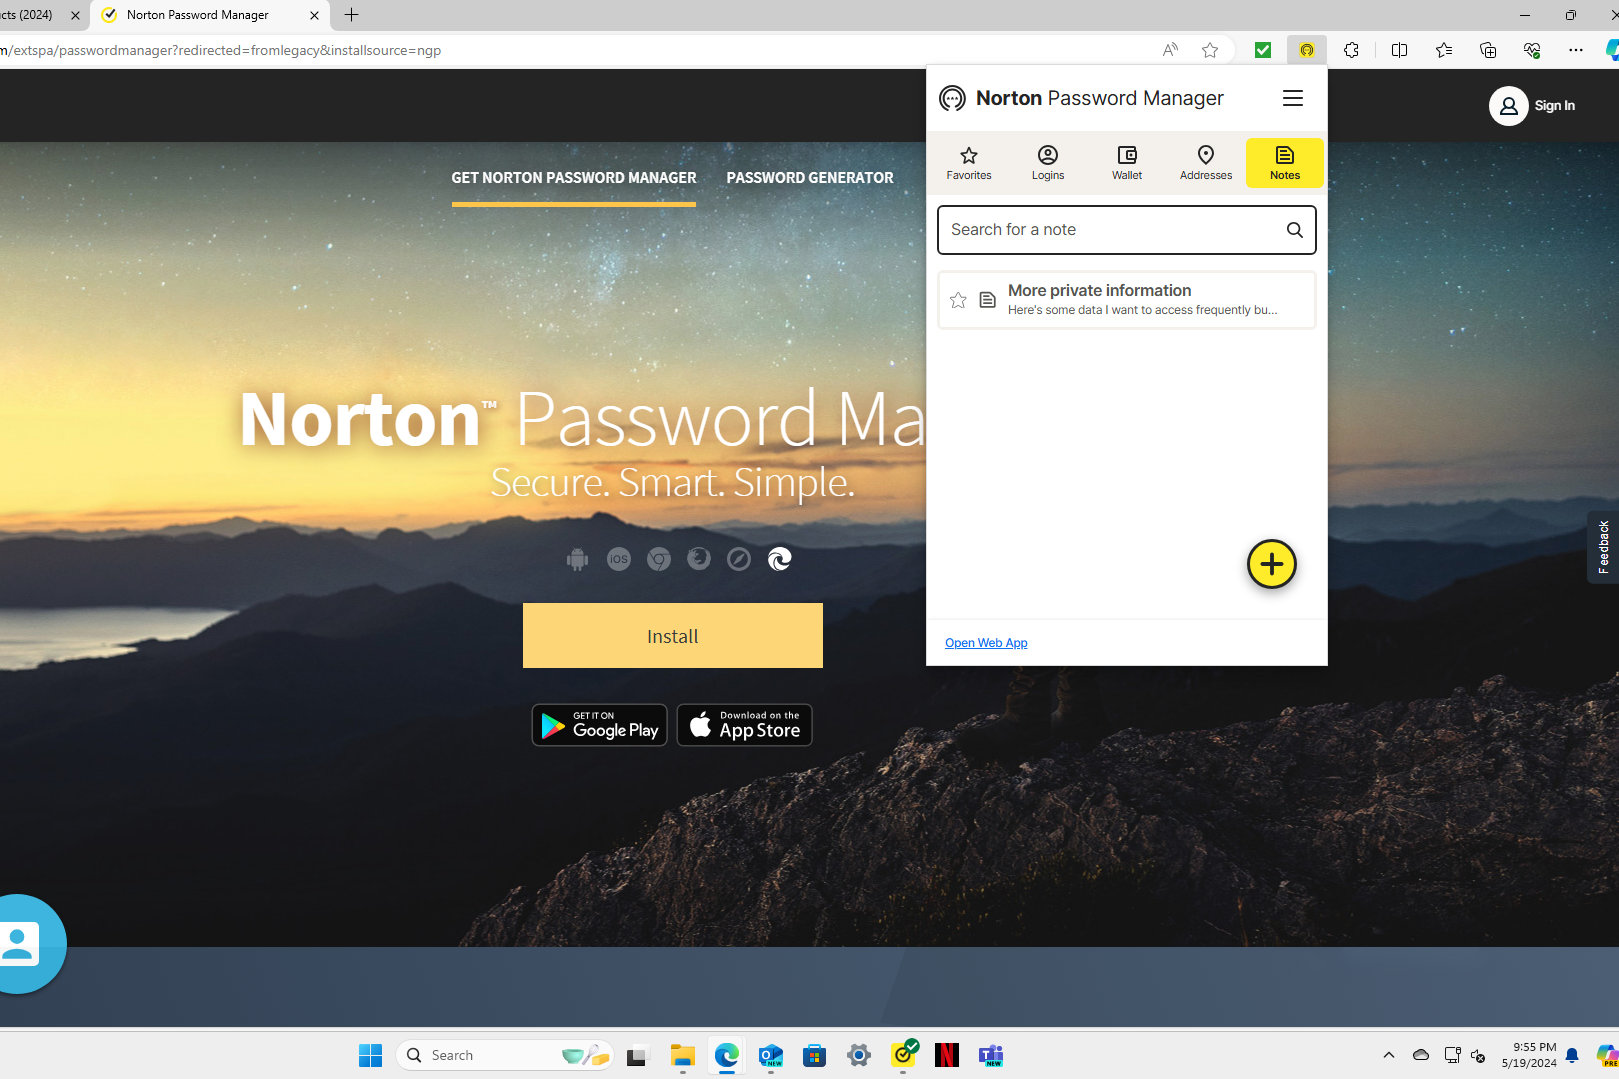 I can add notes, addresses, and credit cards to Norton's Password Manager.